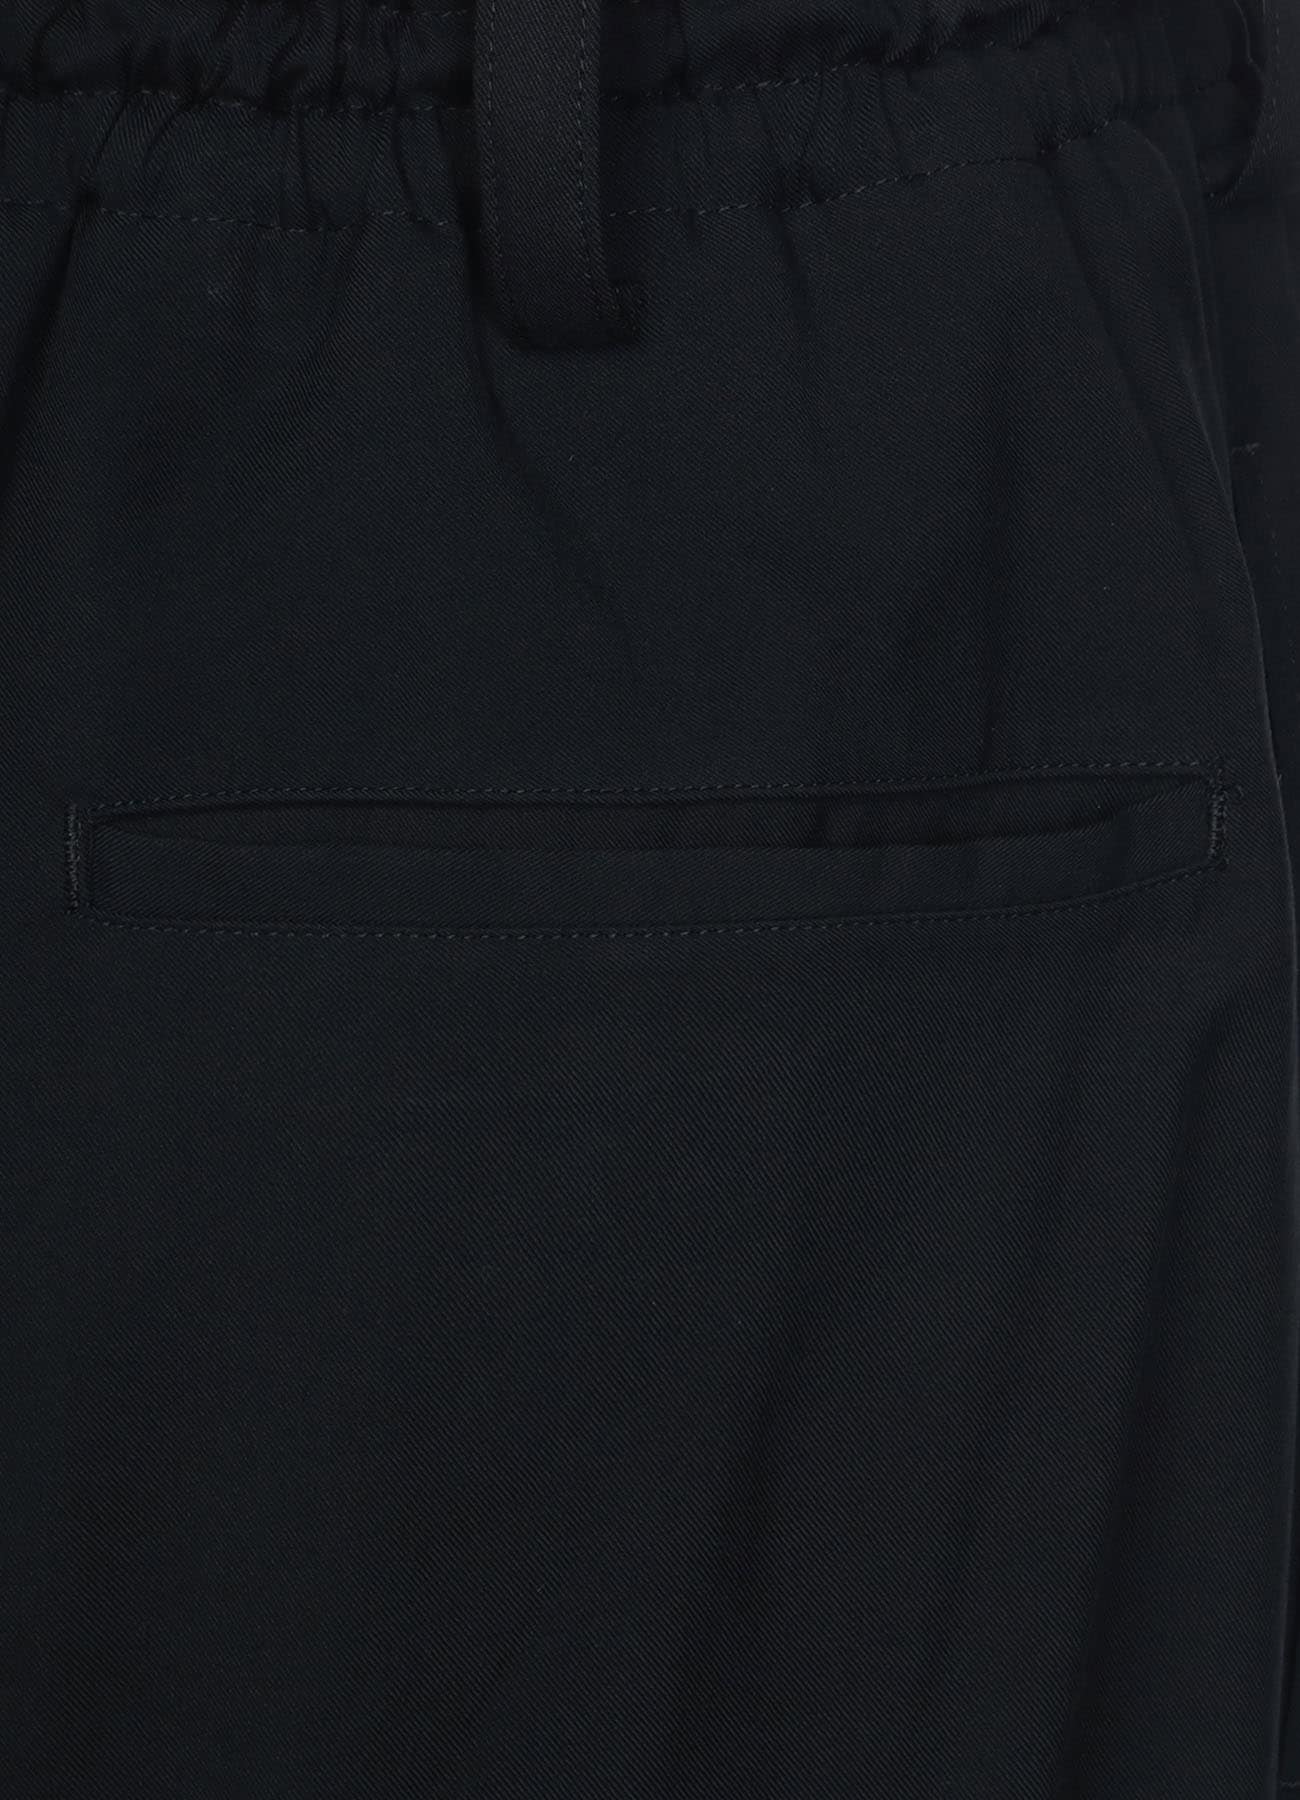 RAYON WASHER TWILL STRINGS GATHERED CROPPED PANTS